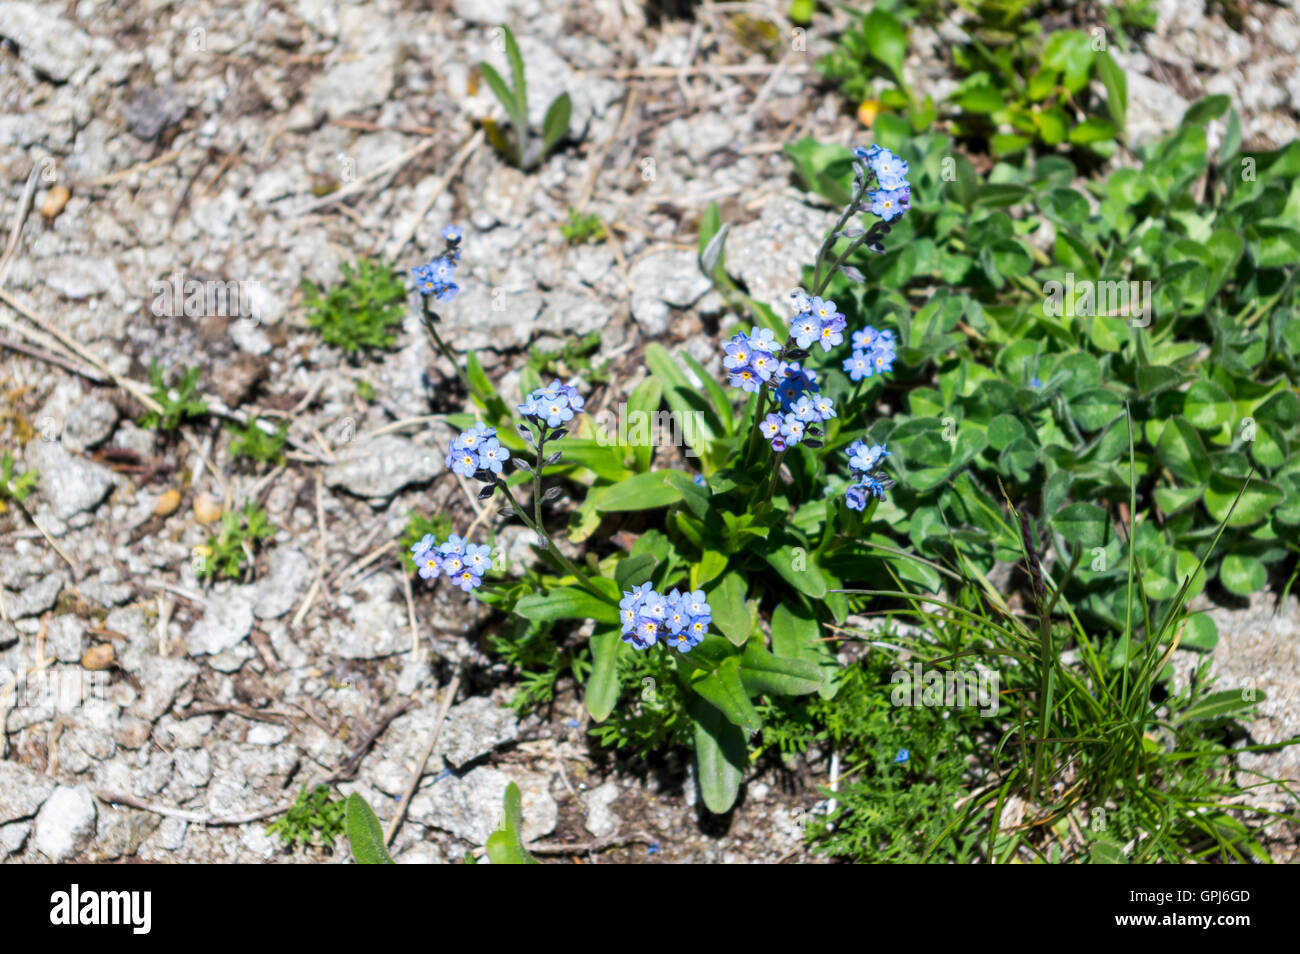 Forget-me-not (Myosotis) flowers in Switzerland, growing at an altitude of 2000m in the Alps. Stock Photo